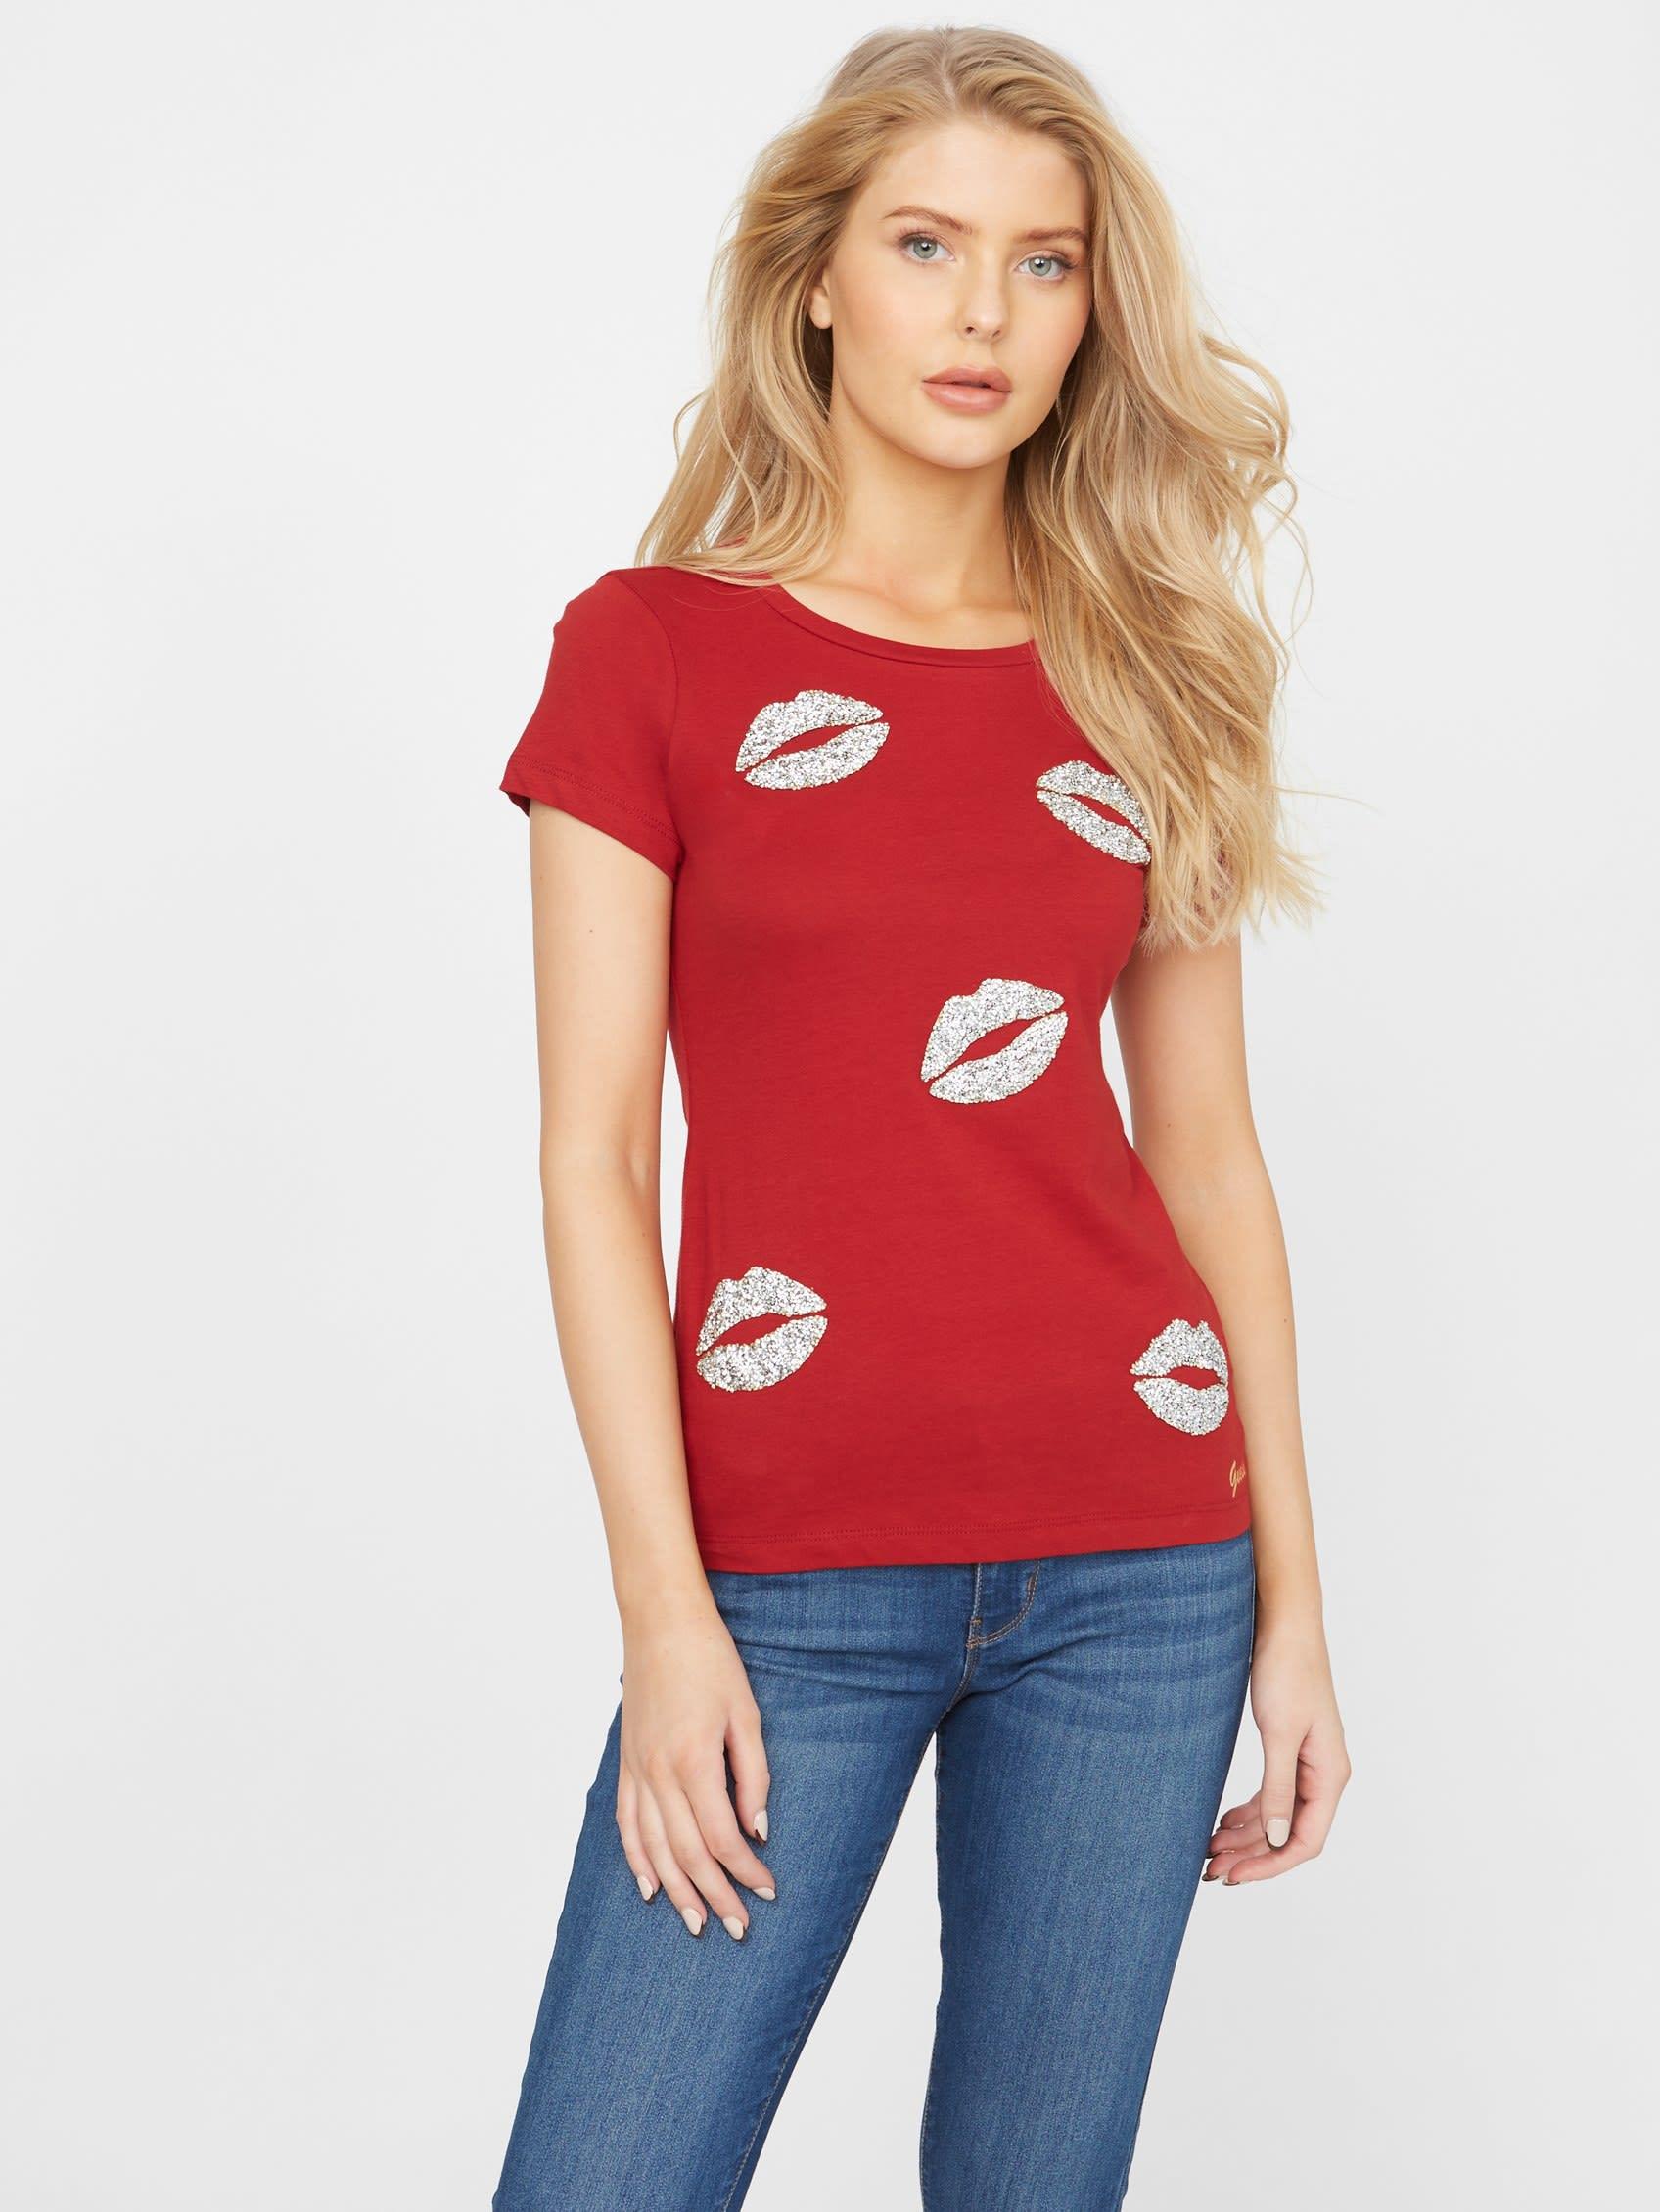 Guess Factory Nara Lip Tee in Red | Lyst